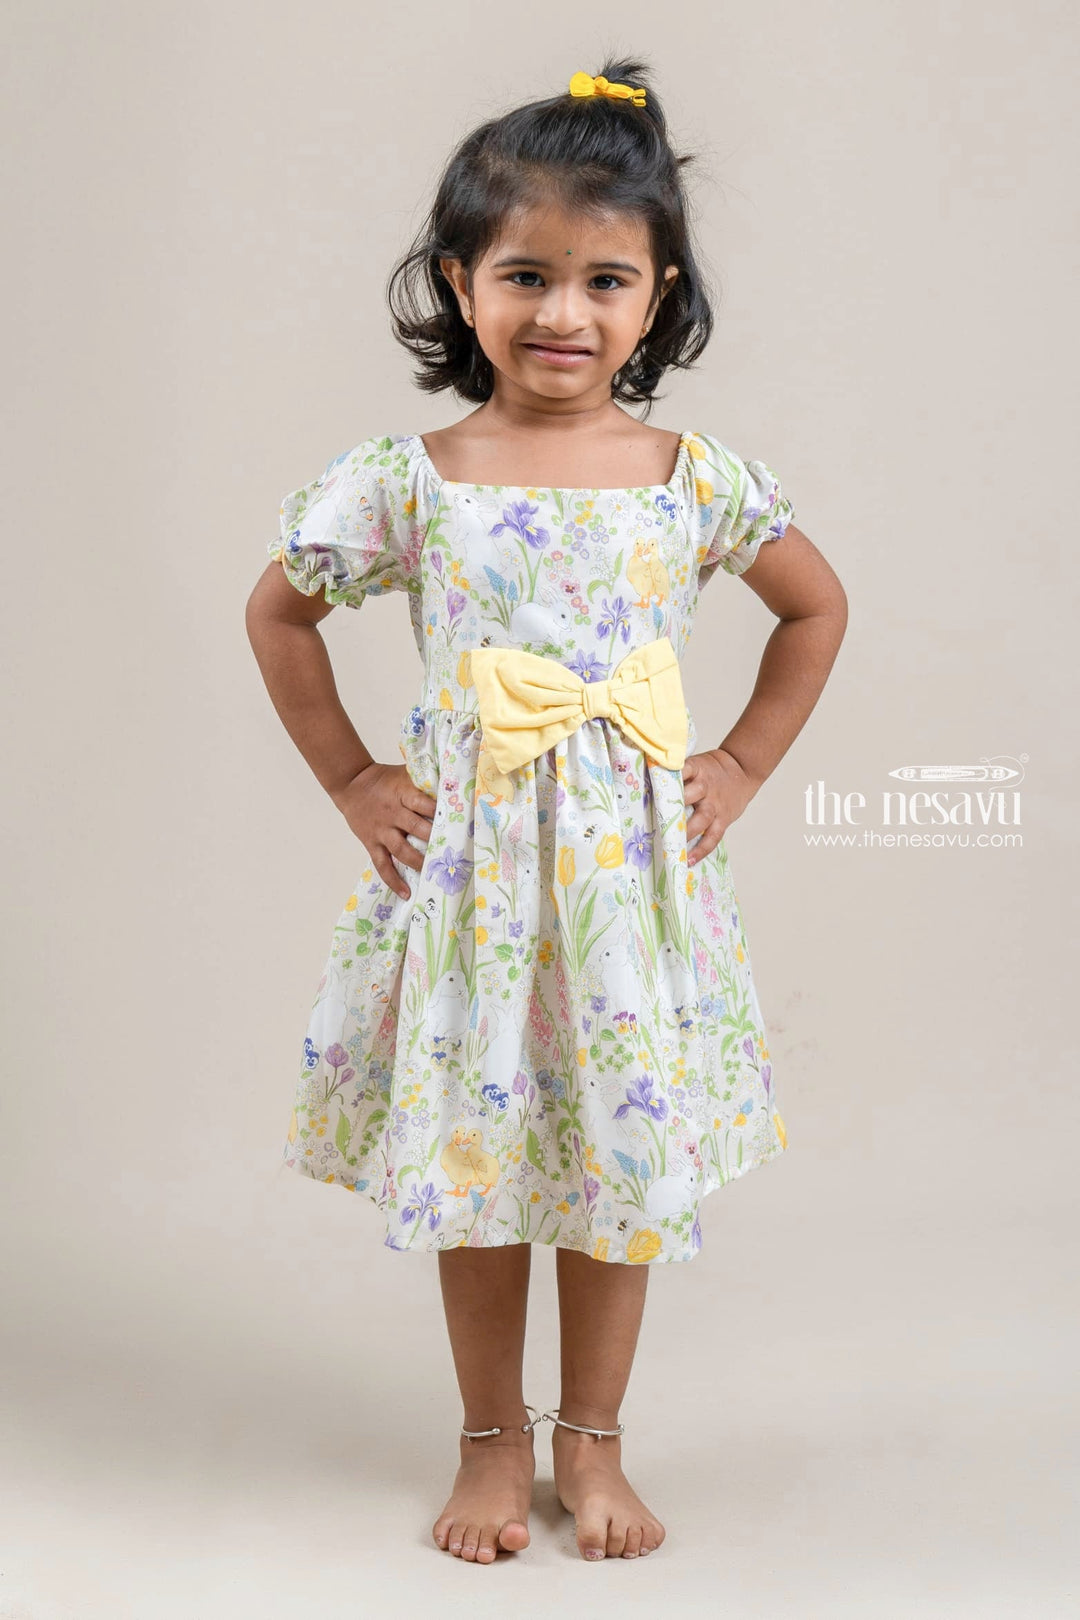 The Nesavu Girls Fancy Frock Cute Animals N Floral Printed White Girls Cotton Frock With Bow Applique Nesavu 18 (2Y) / White / Rayon GFC1036A-18 Latest Frock Design Online | Animal Printed Frock | The Nesavu